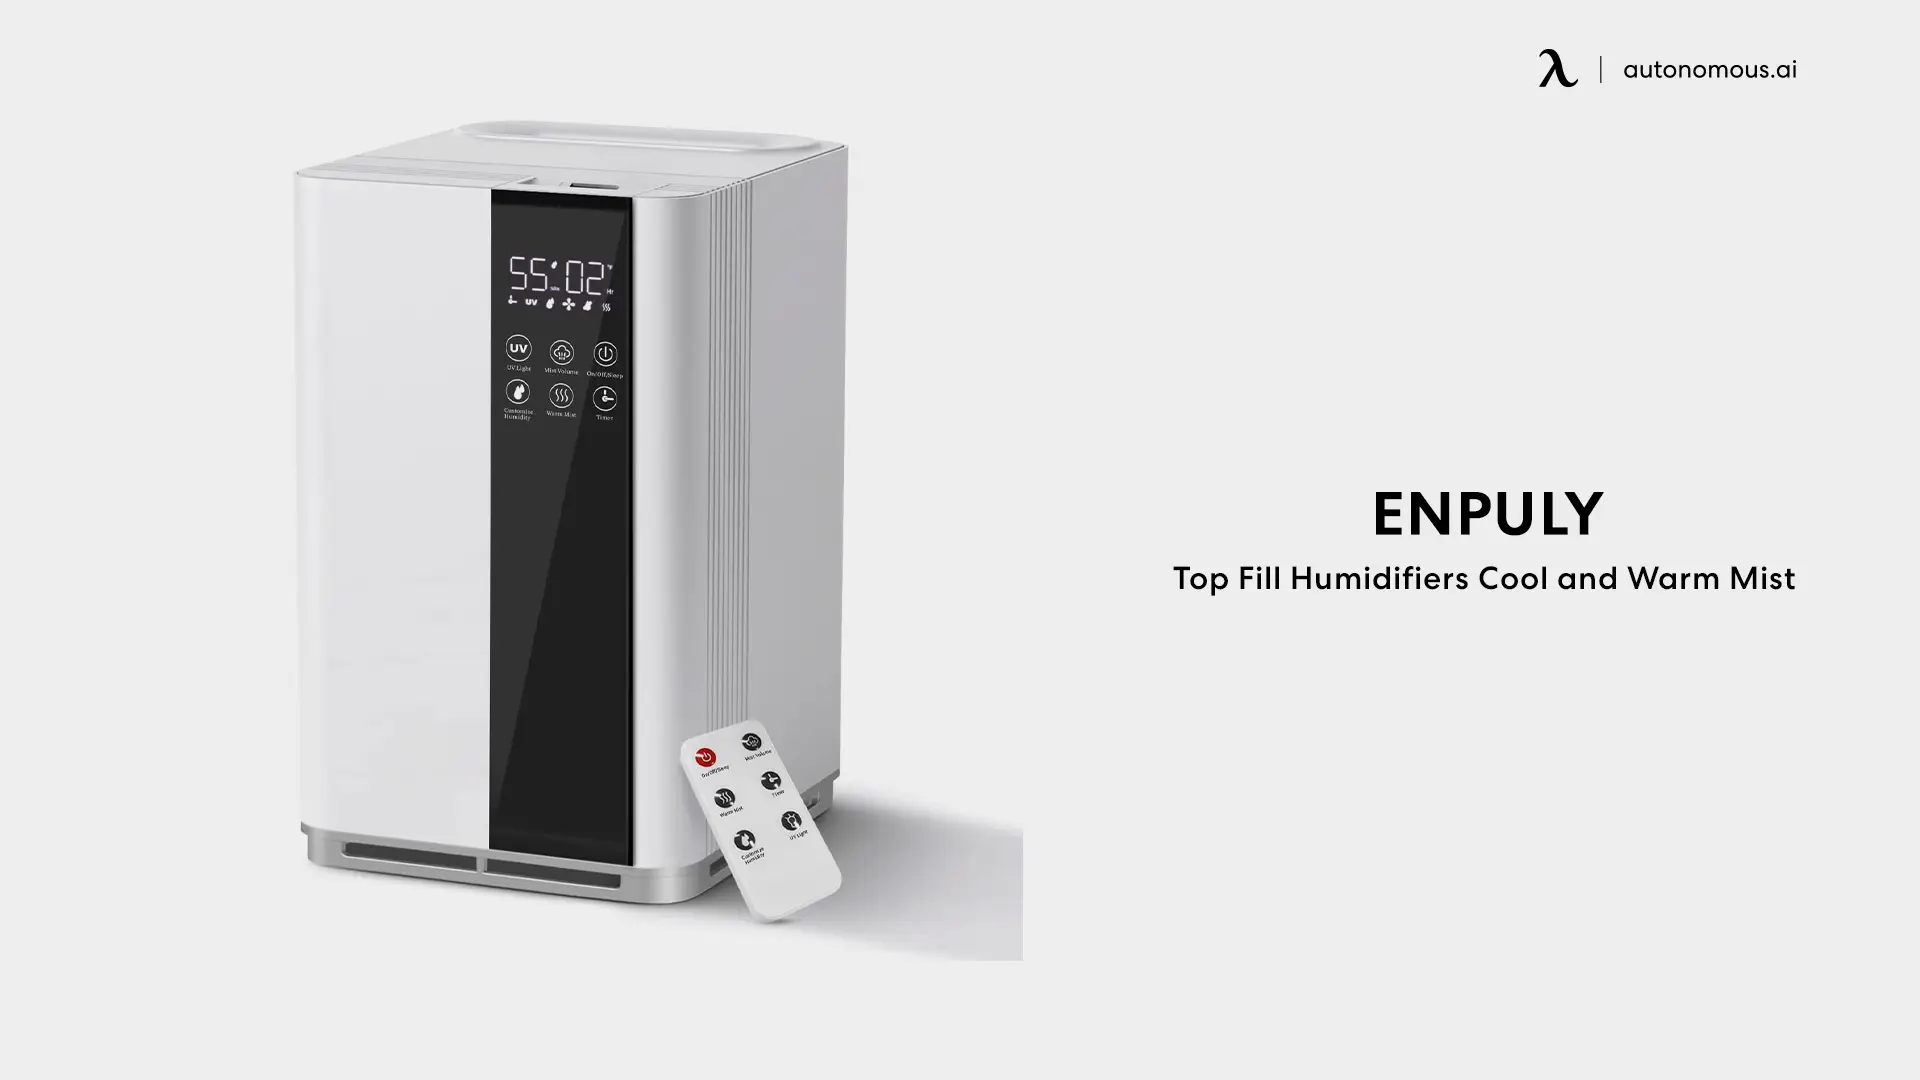 ENPULY 5L Top Fill Humidifiers Cool and Warm Mist